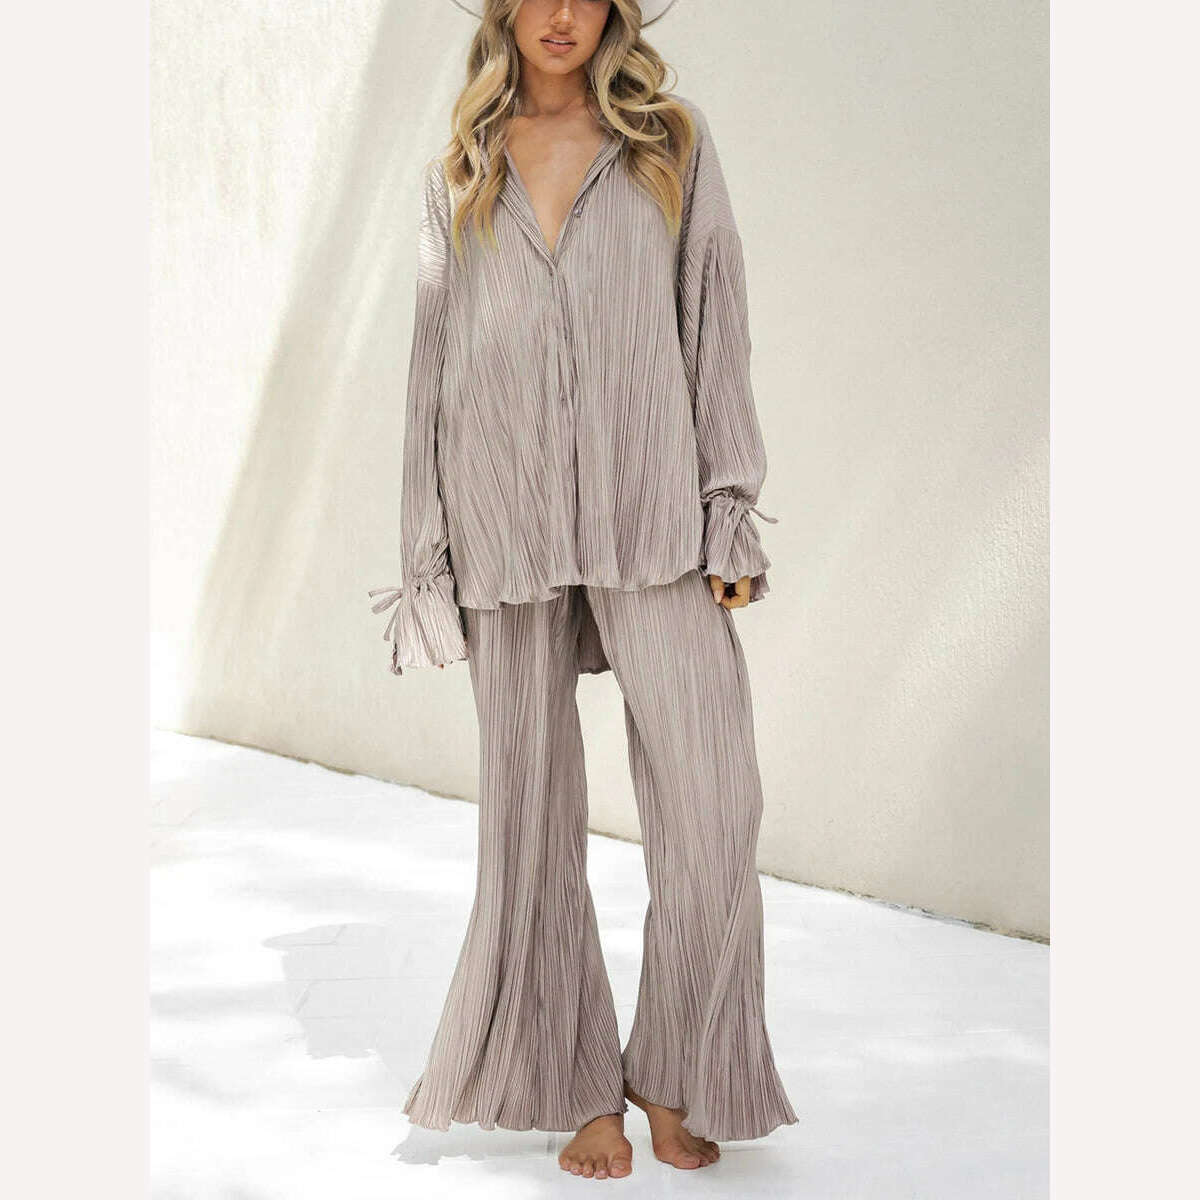 KIMLUD, wsevypo Women Two-piece Pleated Pants Suits Casual Chic Solid Color Long Sleeve Button down Shirts and Straight Leg Trousers Set, KIMLUD Womens Clothes